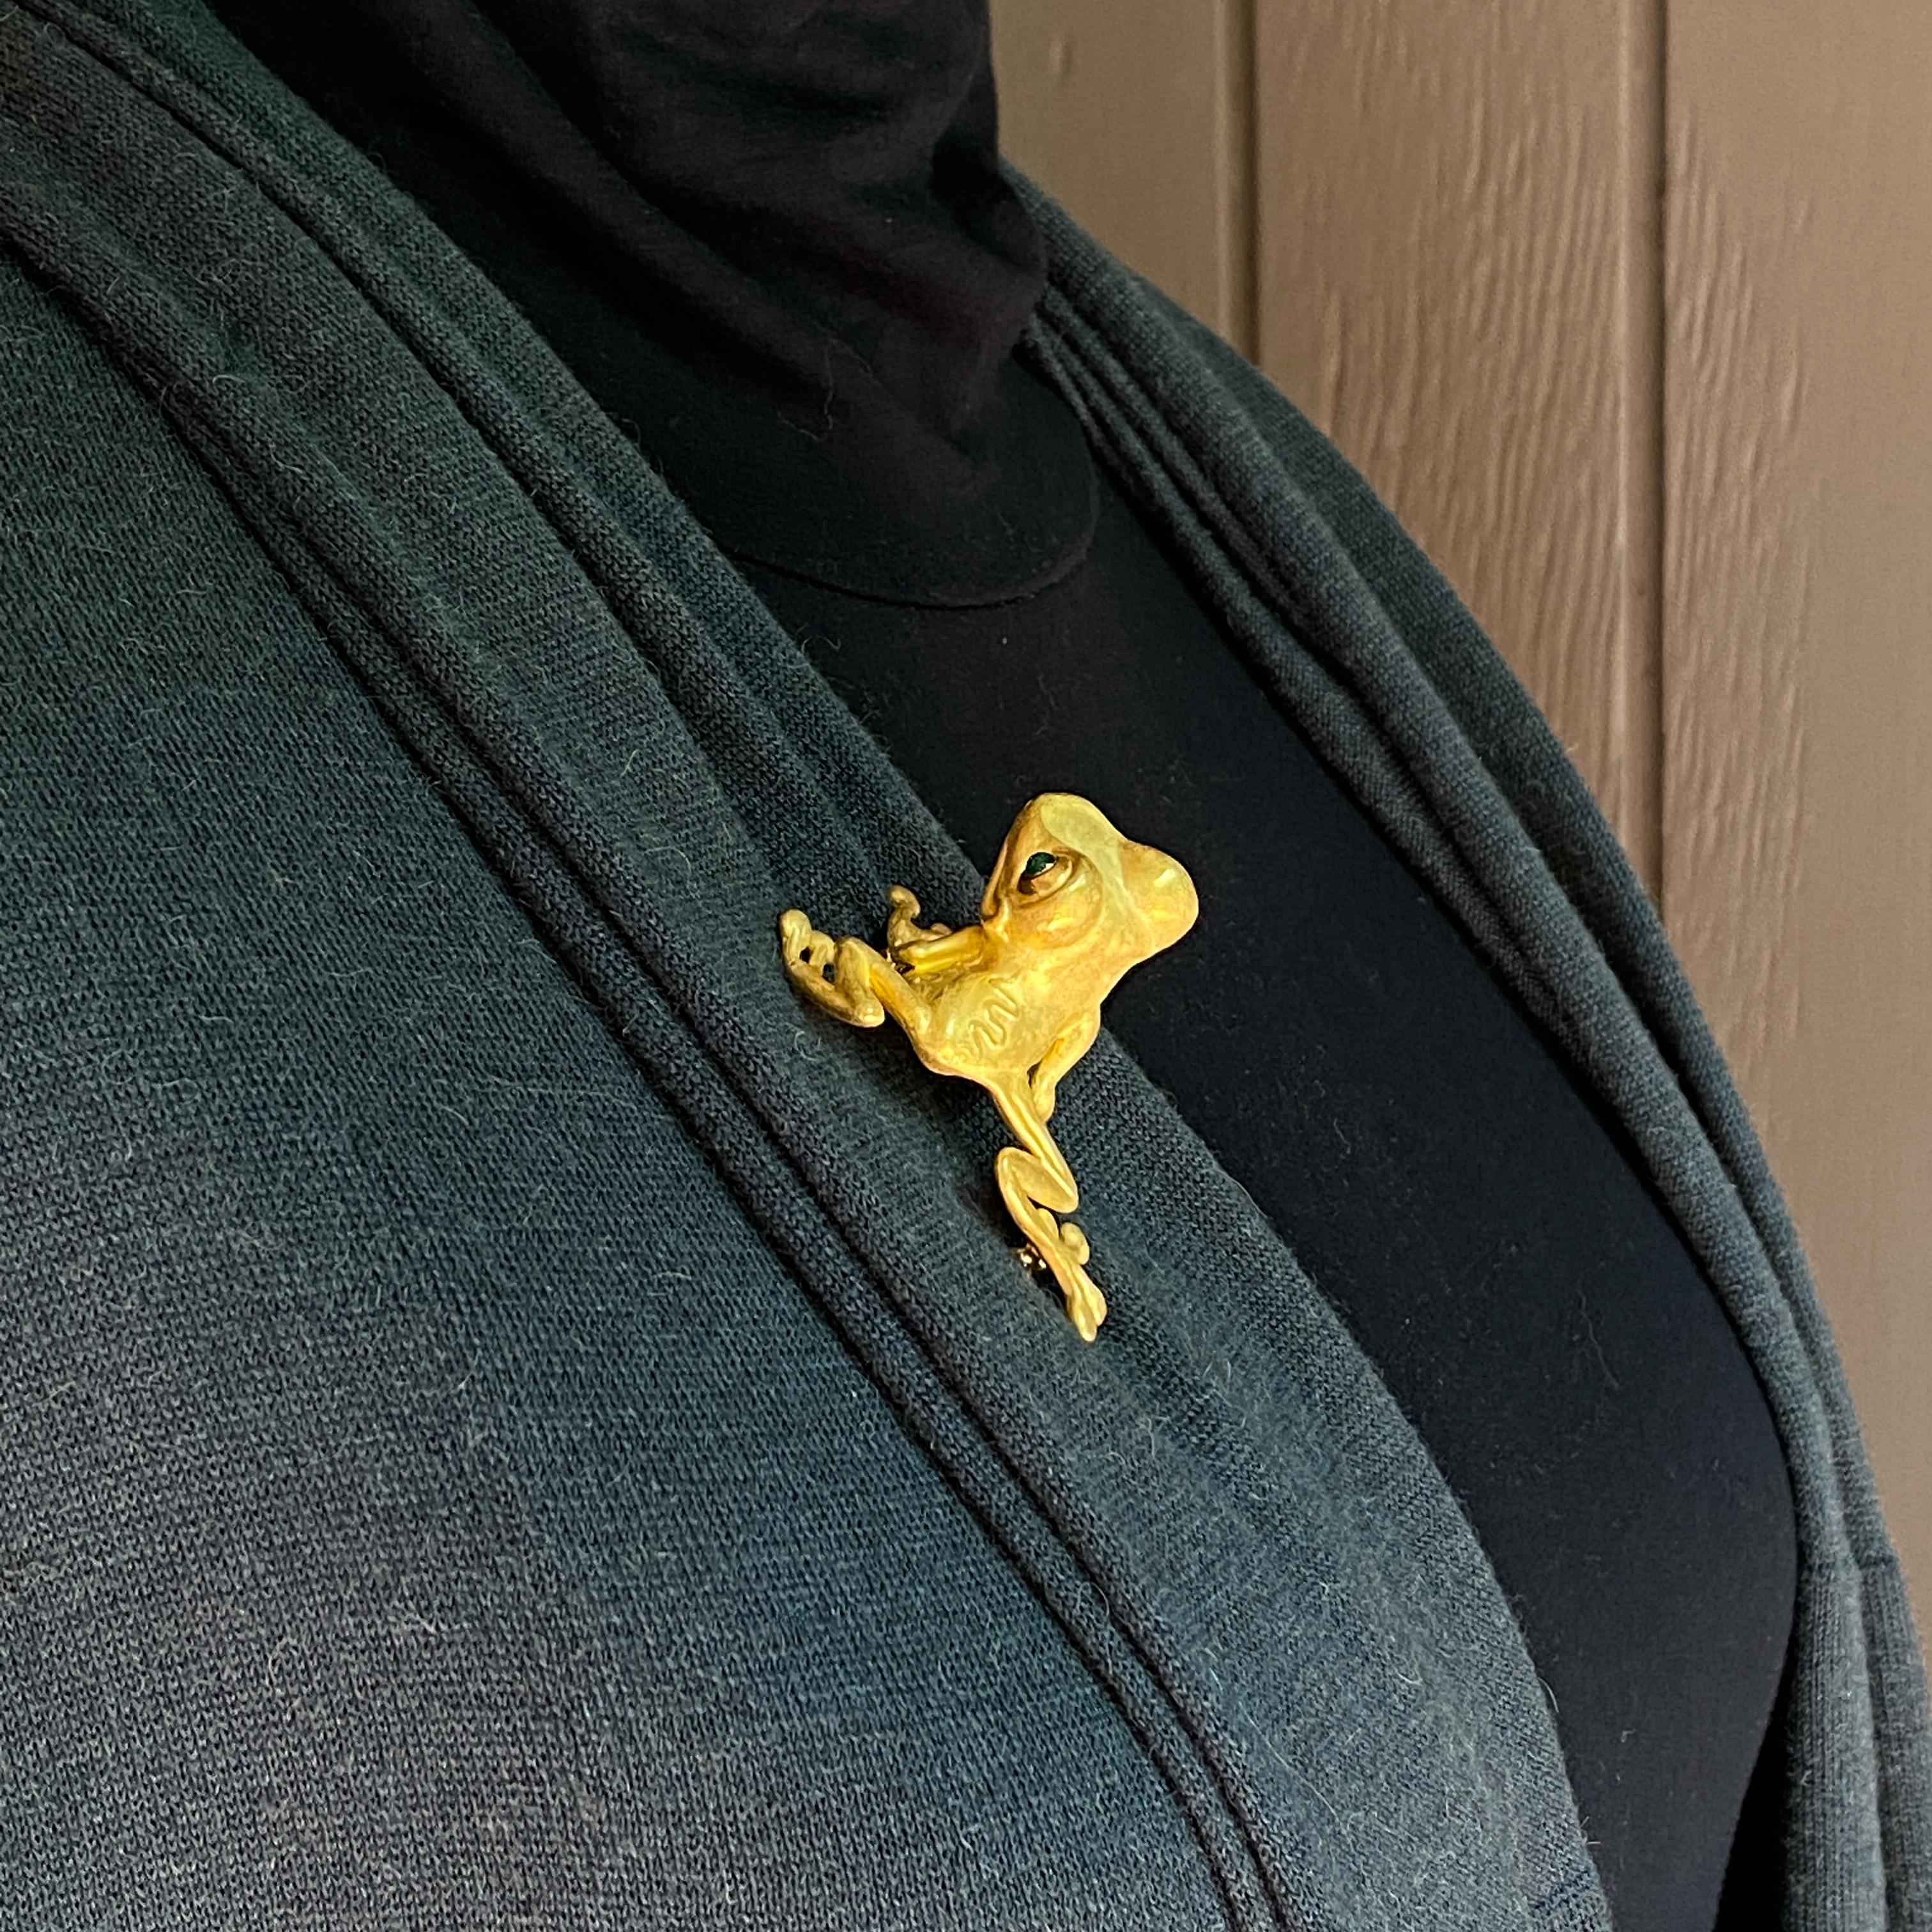 Large 22K Yellow Gold Tree Frog Brooch with Emerald Eyes 7